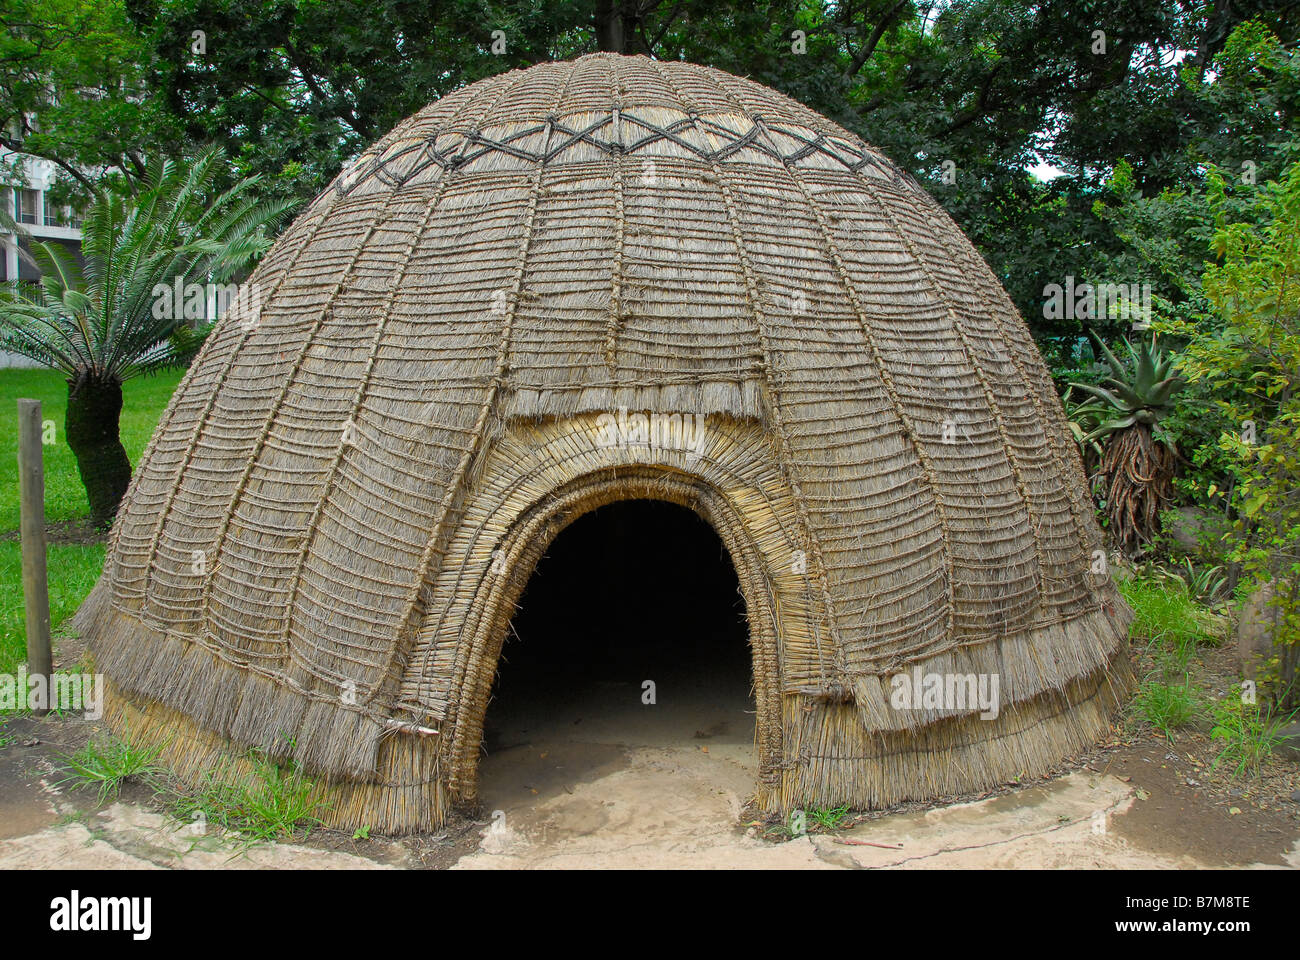 Traditional Zulu hut, called an umuzi. Not used very often anymore today. Pietermaritzburg, South Africa Stock Photo